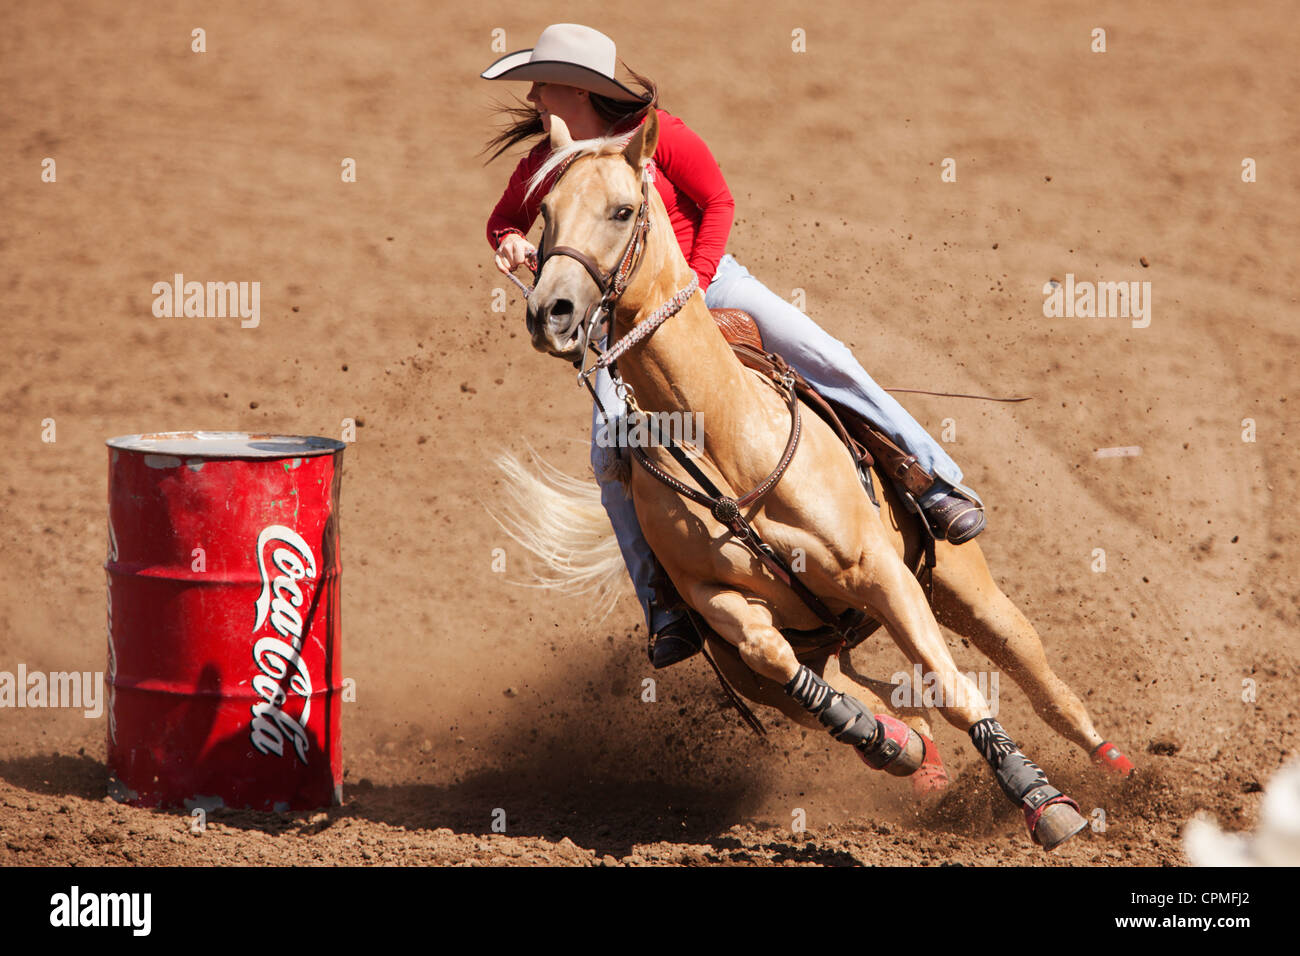 A competitor in the barrel racing competition races at the 90th annual Black Hills Roundup rodeo in Belle Fourche, South Dakota. Stock Photo